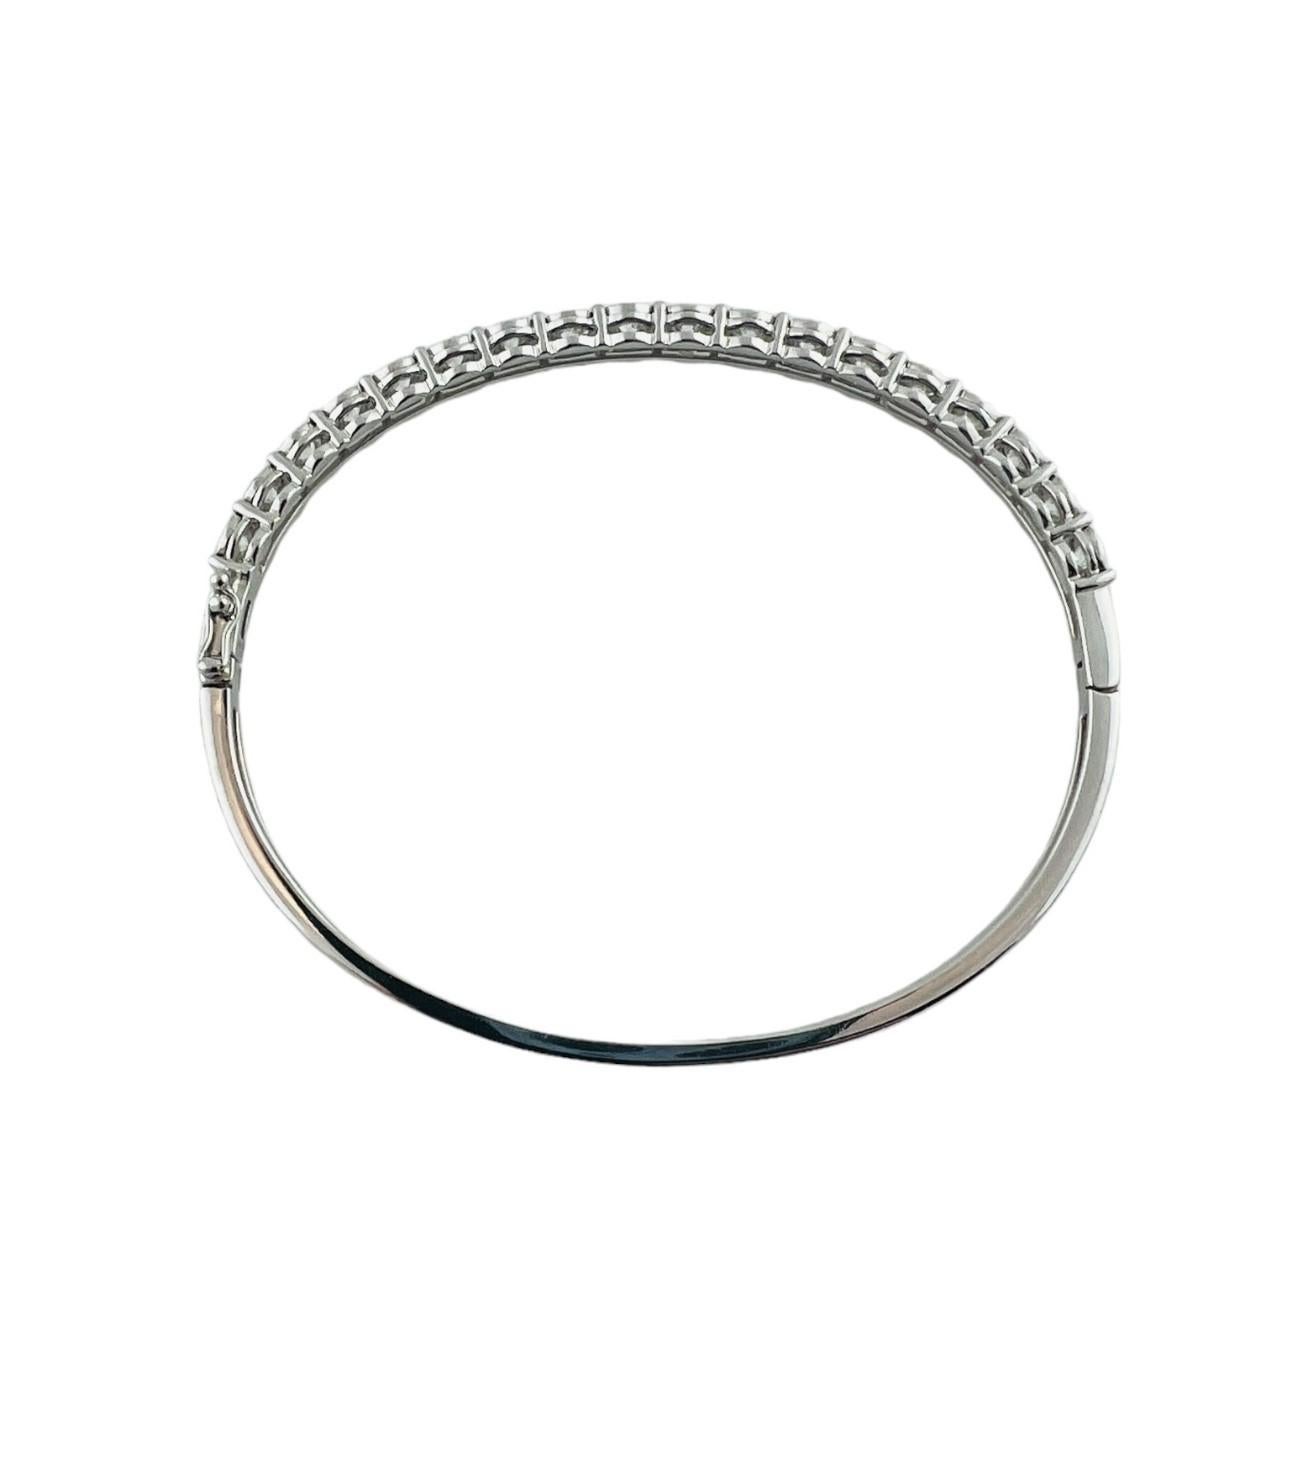 This sparkling hinged bangle bracelet features 18 round brilliant cut diamonds set classic 14K white gold. Width: 5 mm.

Total diamond weight:   2.14  ct.

Diamond color:  I

Diamond clarity:  SI2-I1

Size: 6.5 inches

Weight:   10.5 gr./  6.8